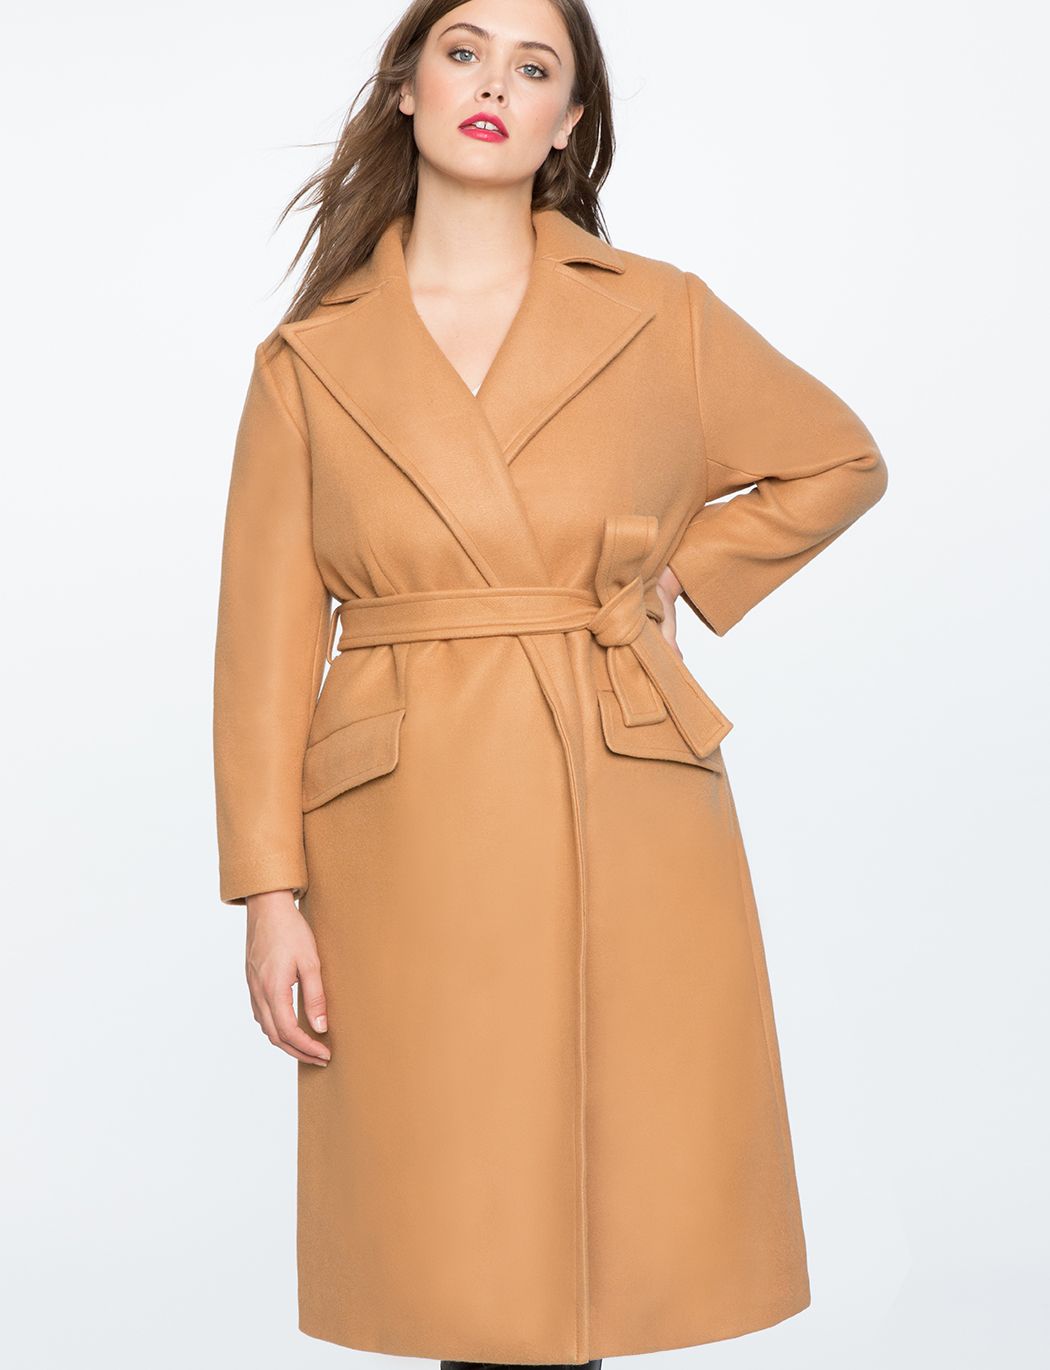 15 Plus-Size Coats To Stock Up On In Case Fall Weather Ever Arrives